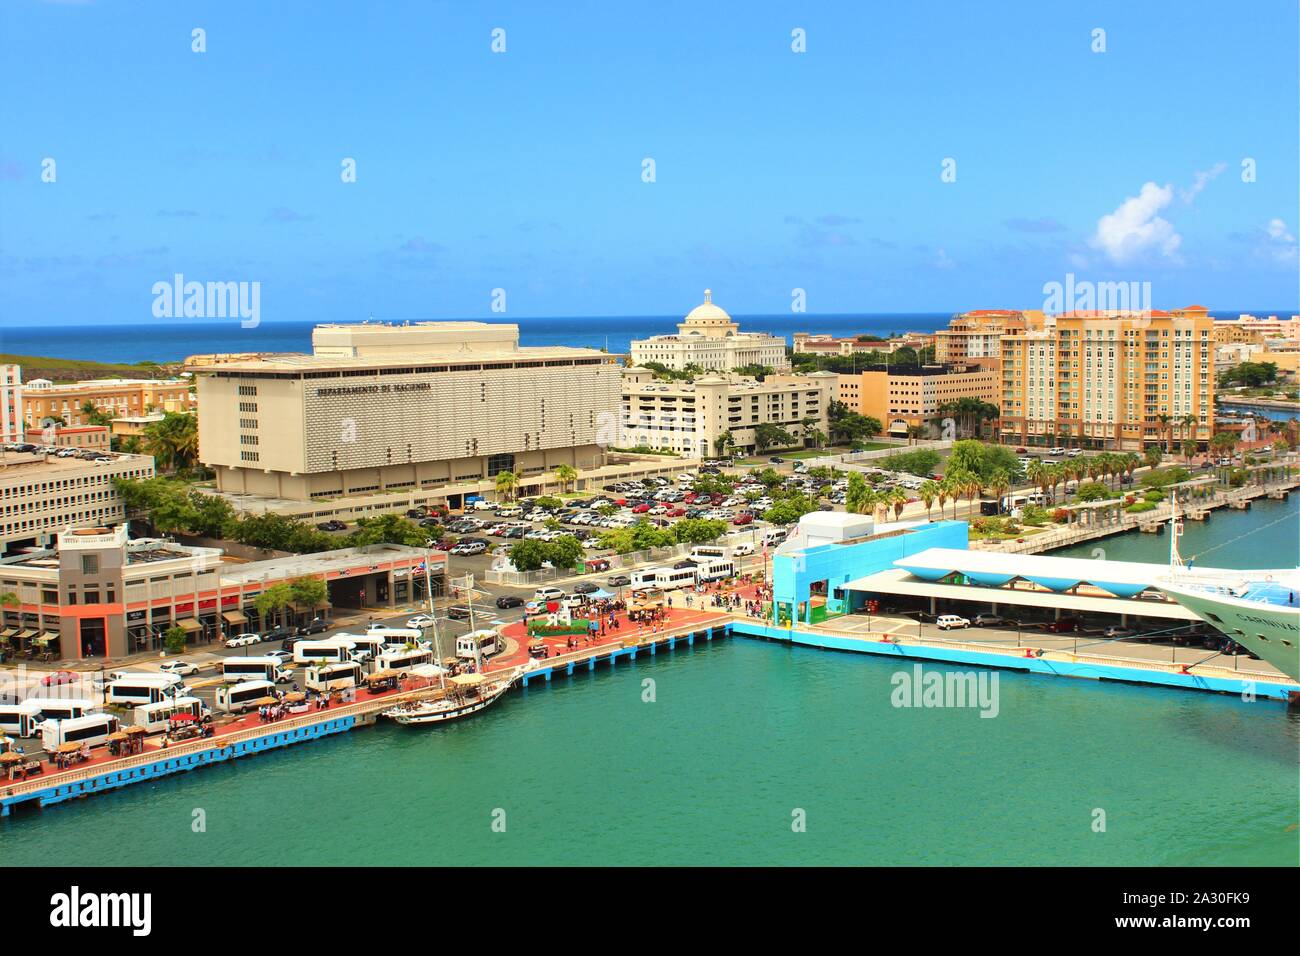 View of San Juan, the capital city of Puerto Rico, taken from the top of a cruise ship docked in port. Stock Photo